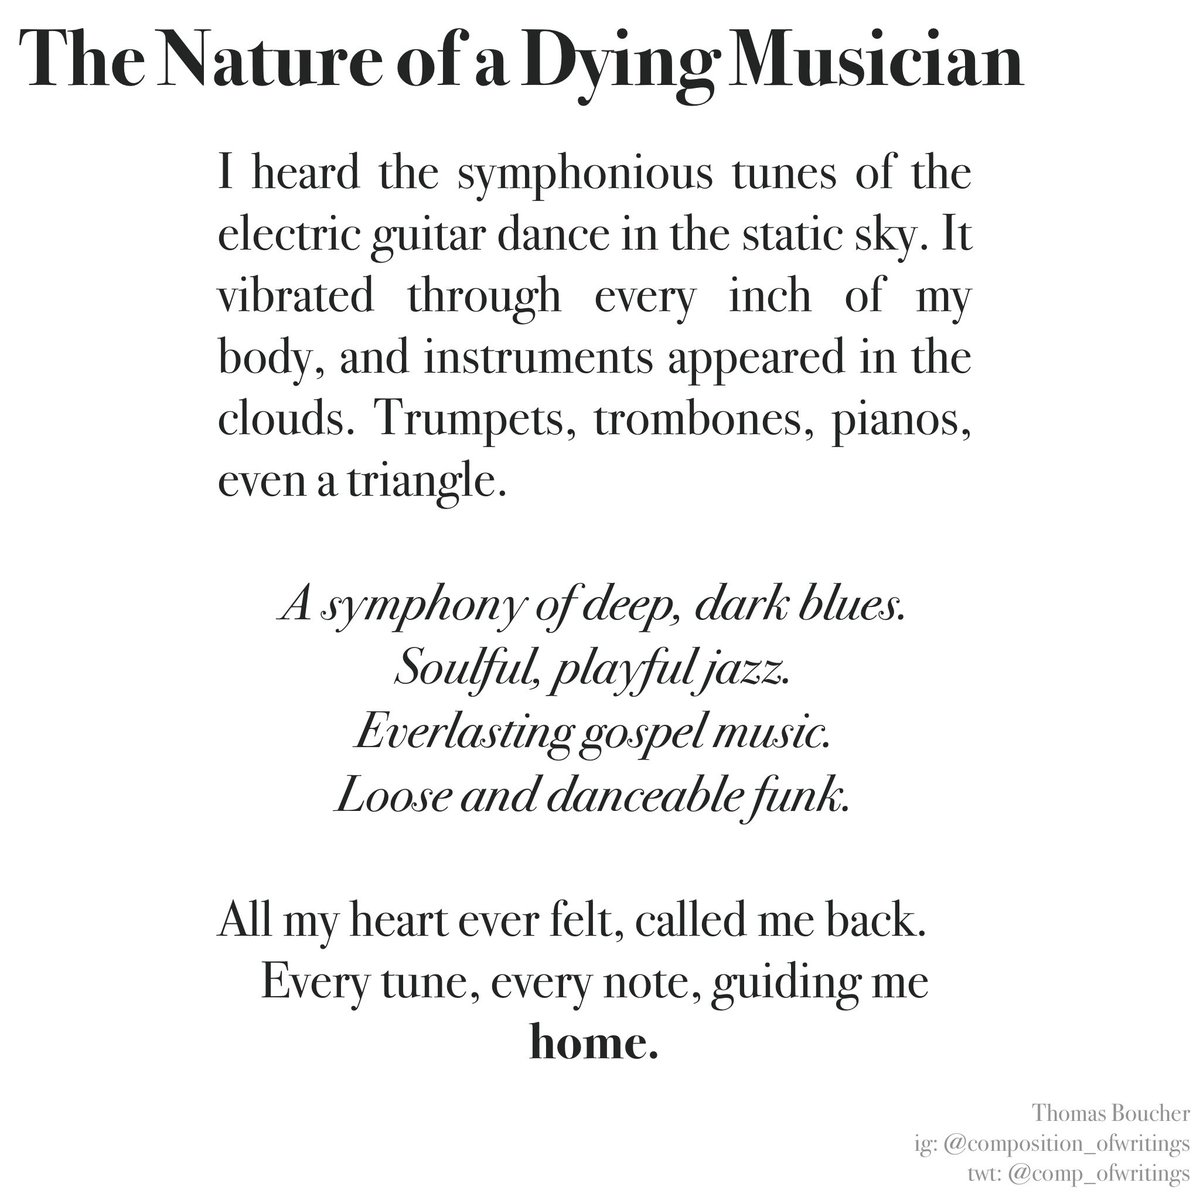 The Nature of a Dying Musician - Thomas Boucher “Trumpets, trombones, pianos, even a triangle.” #poems #poetry #writing #stories #shropshire